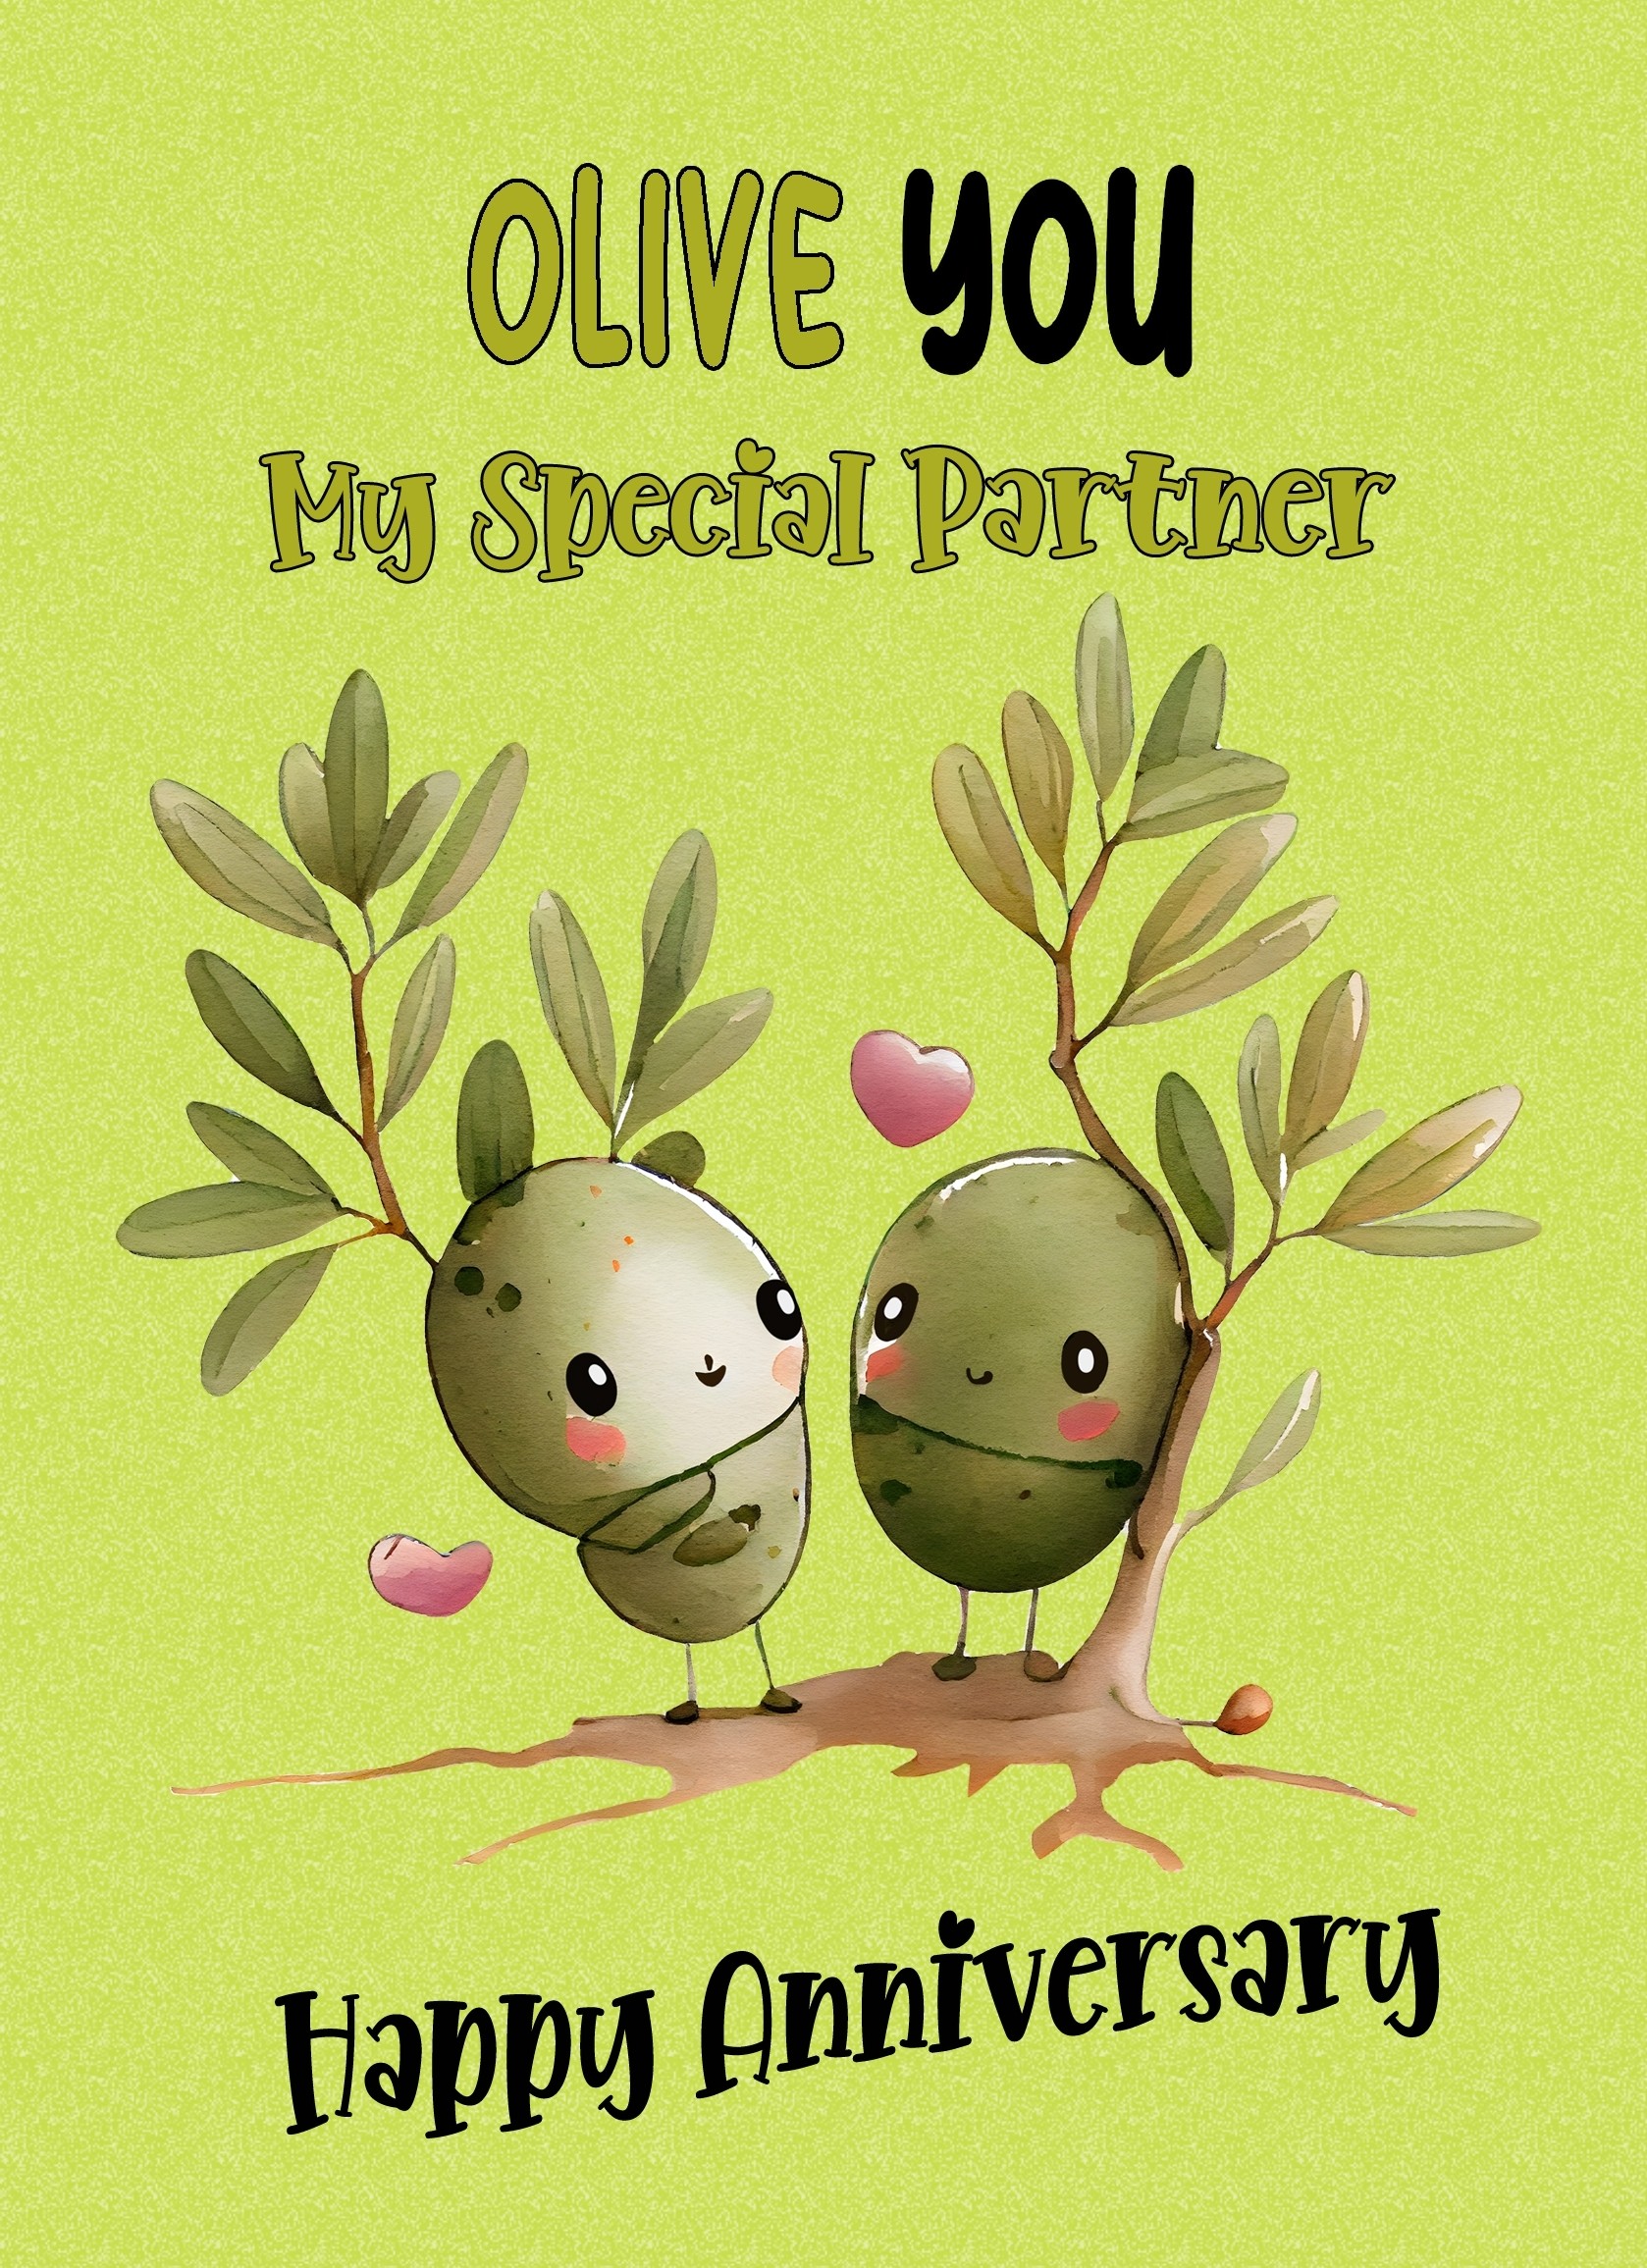 Funny Pun Romantic Anniversary Card for Partner (Olive You)